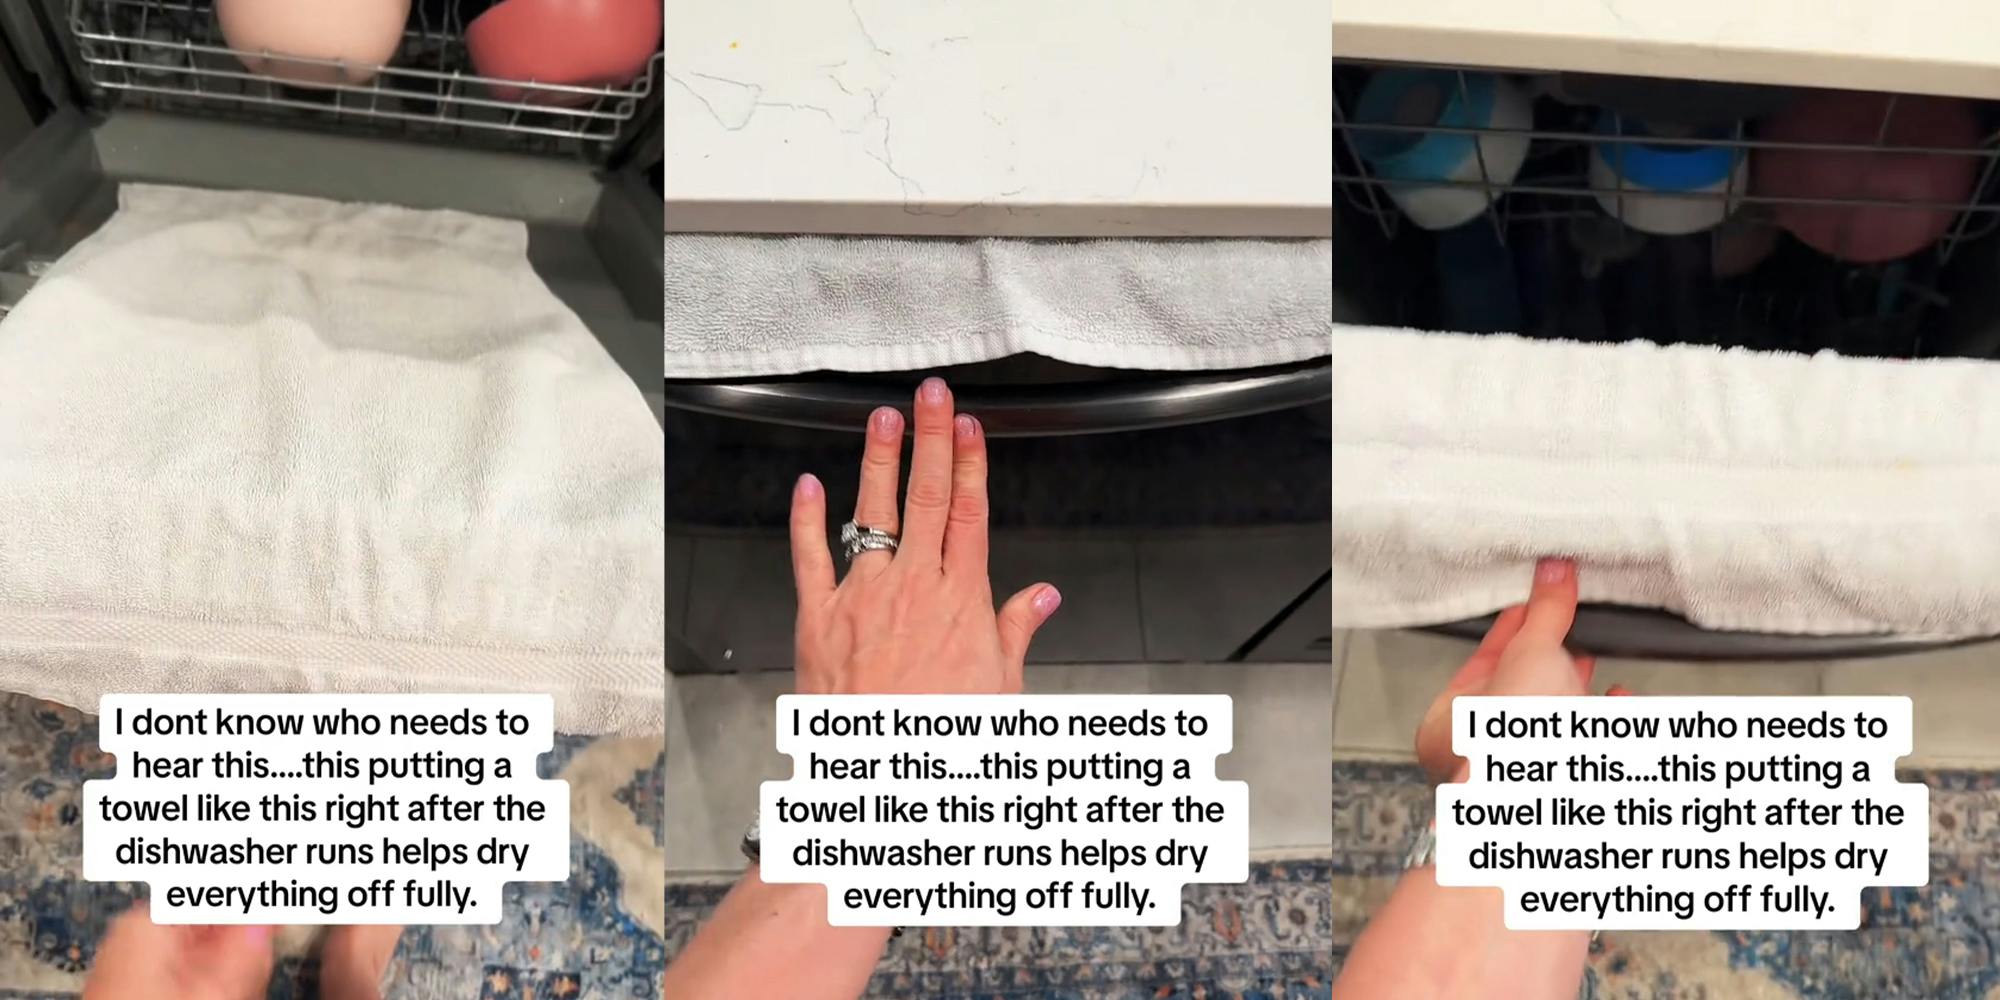 Woman shares towel hack to drying dishes ‘fully’ in dishwasher